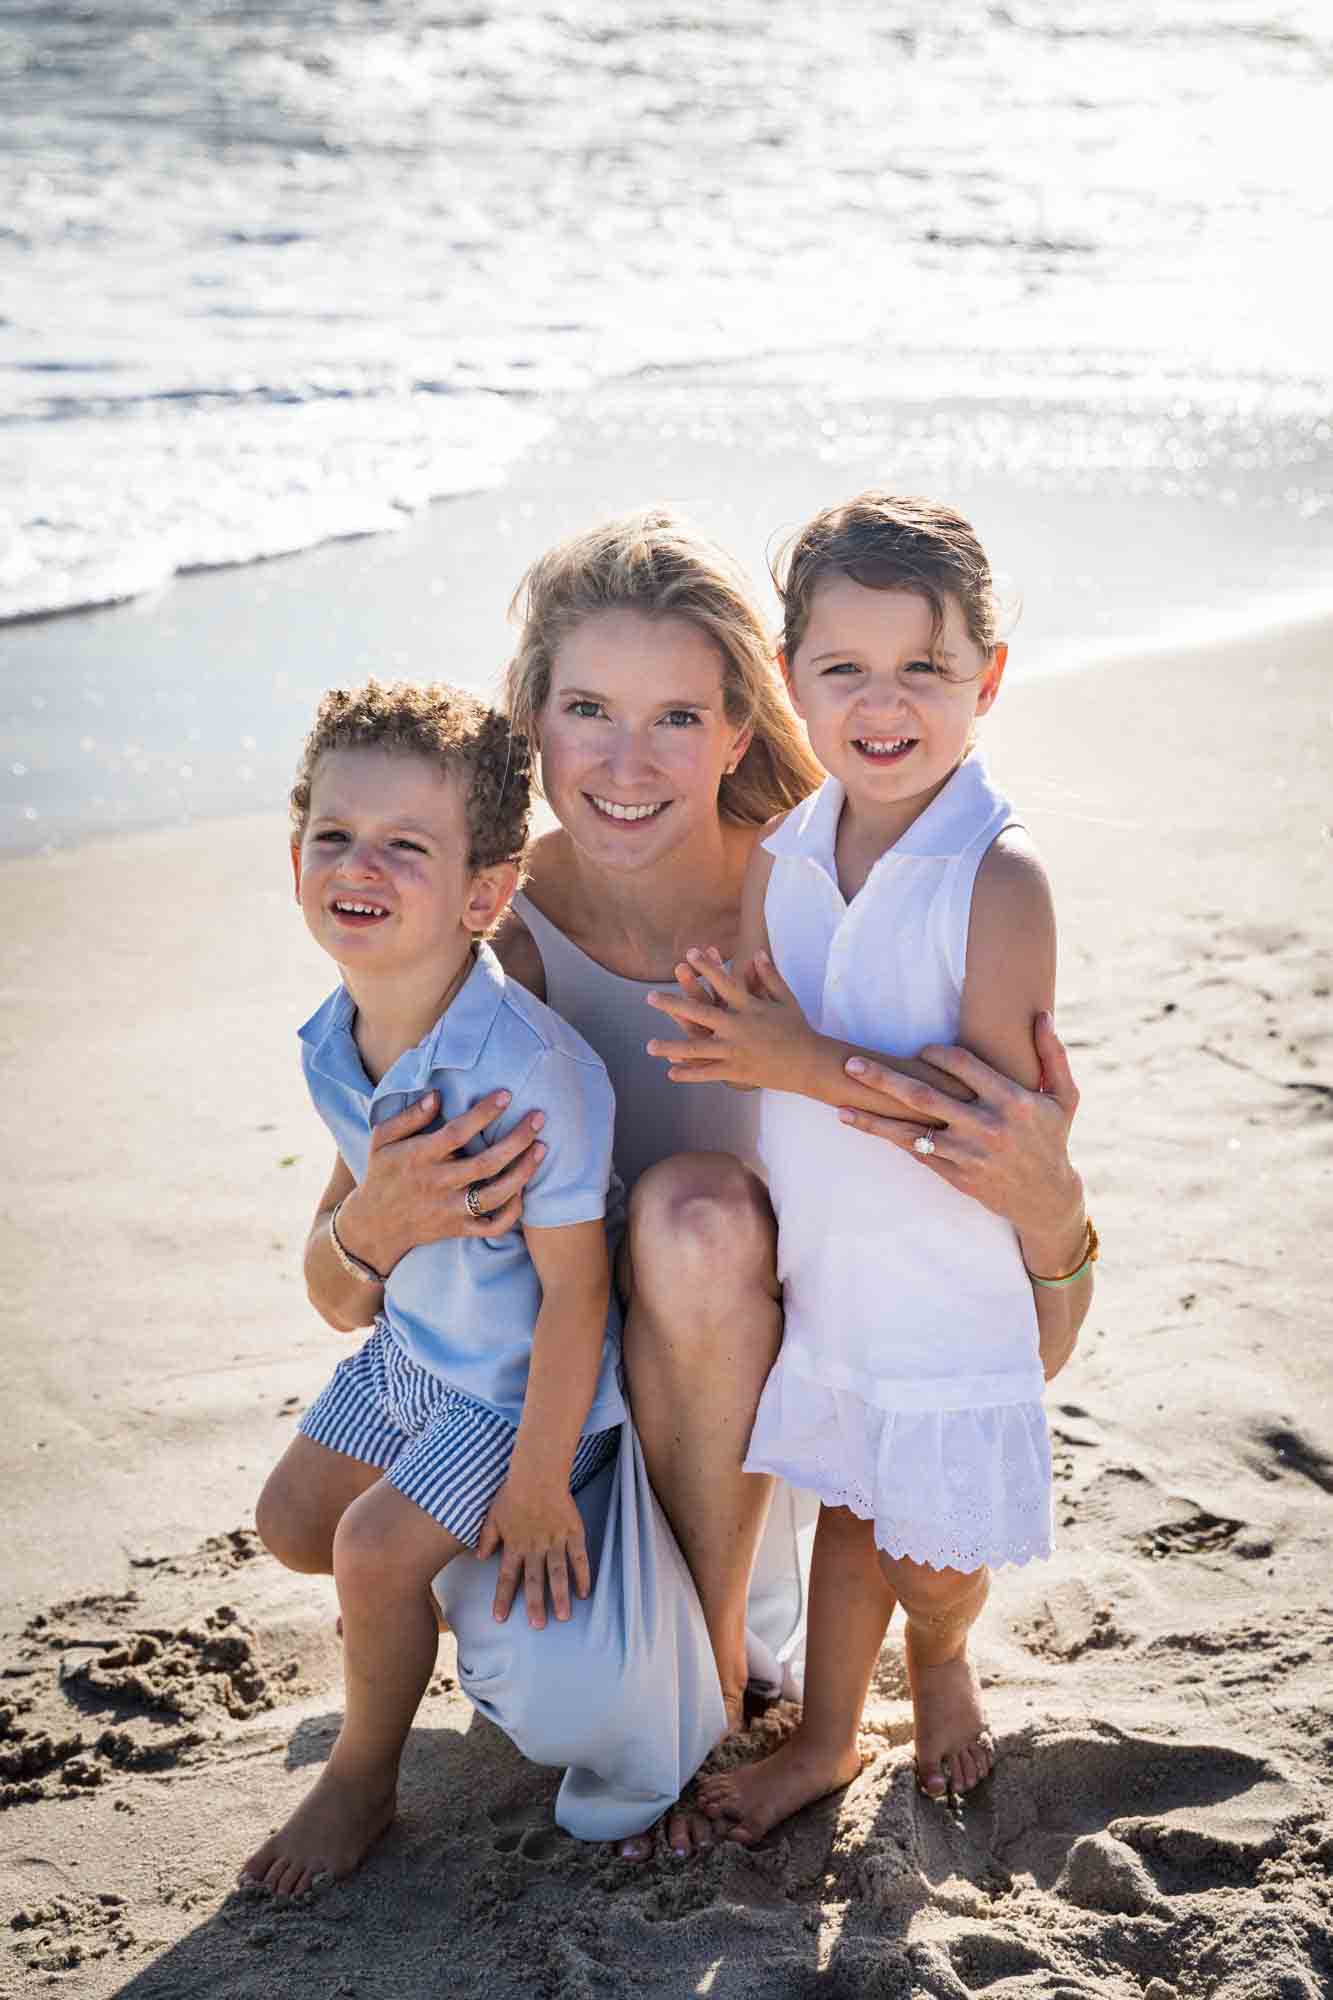 Mother with two small children on a beach for an article on beach family portrait tips